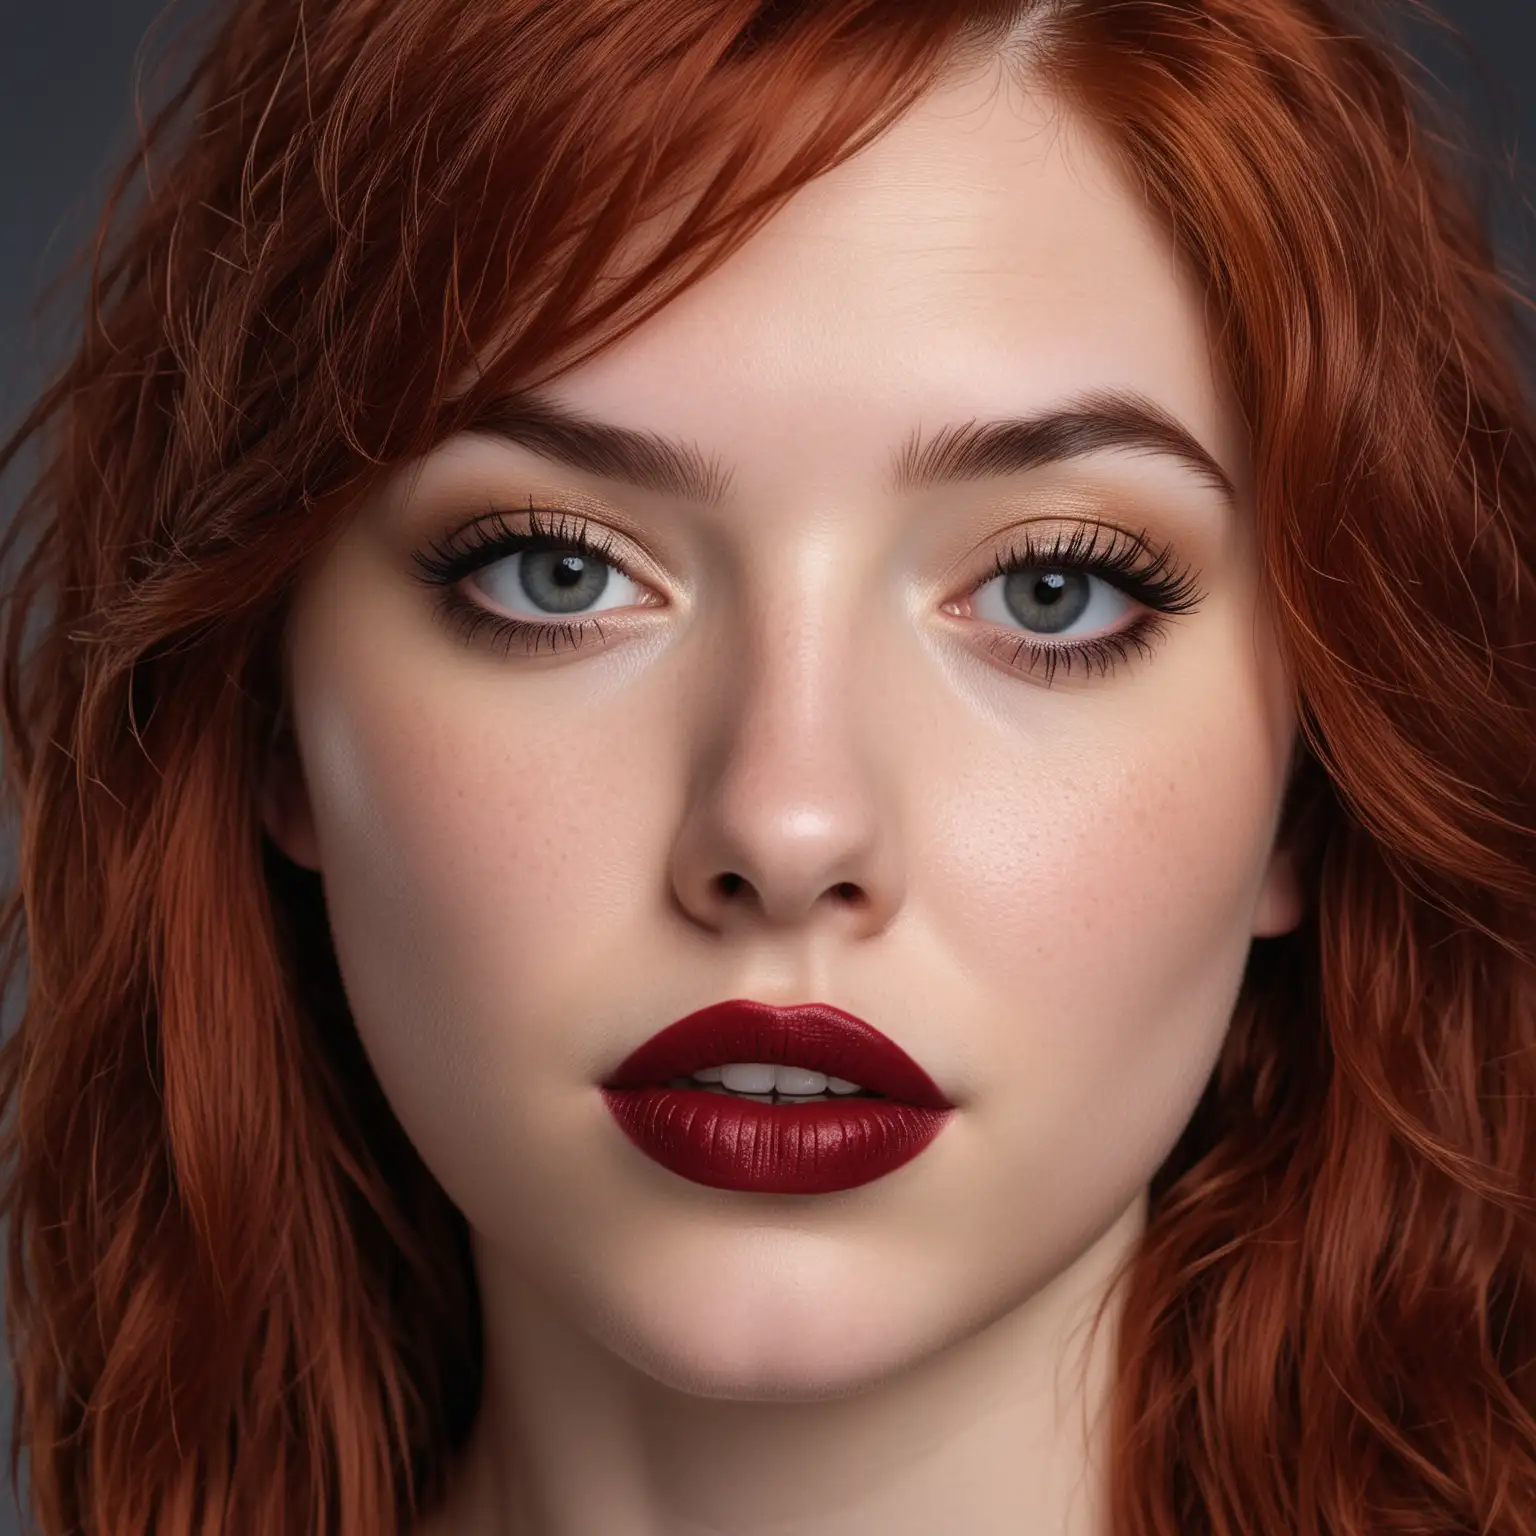 Portrait of Young Woman with Red Hair and Black Lipstick